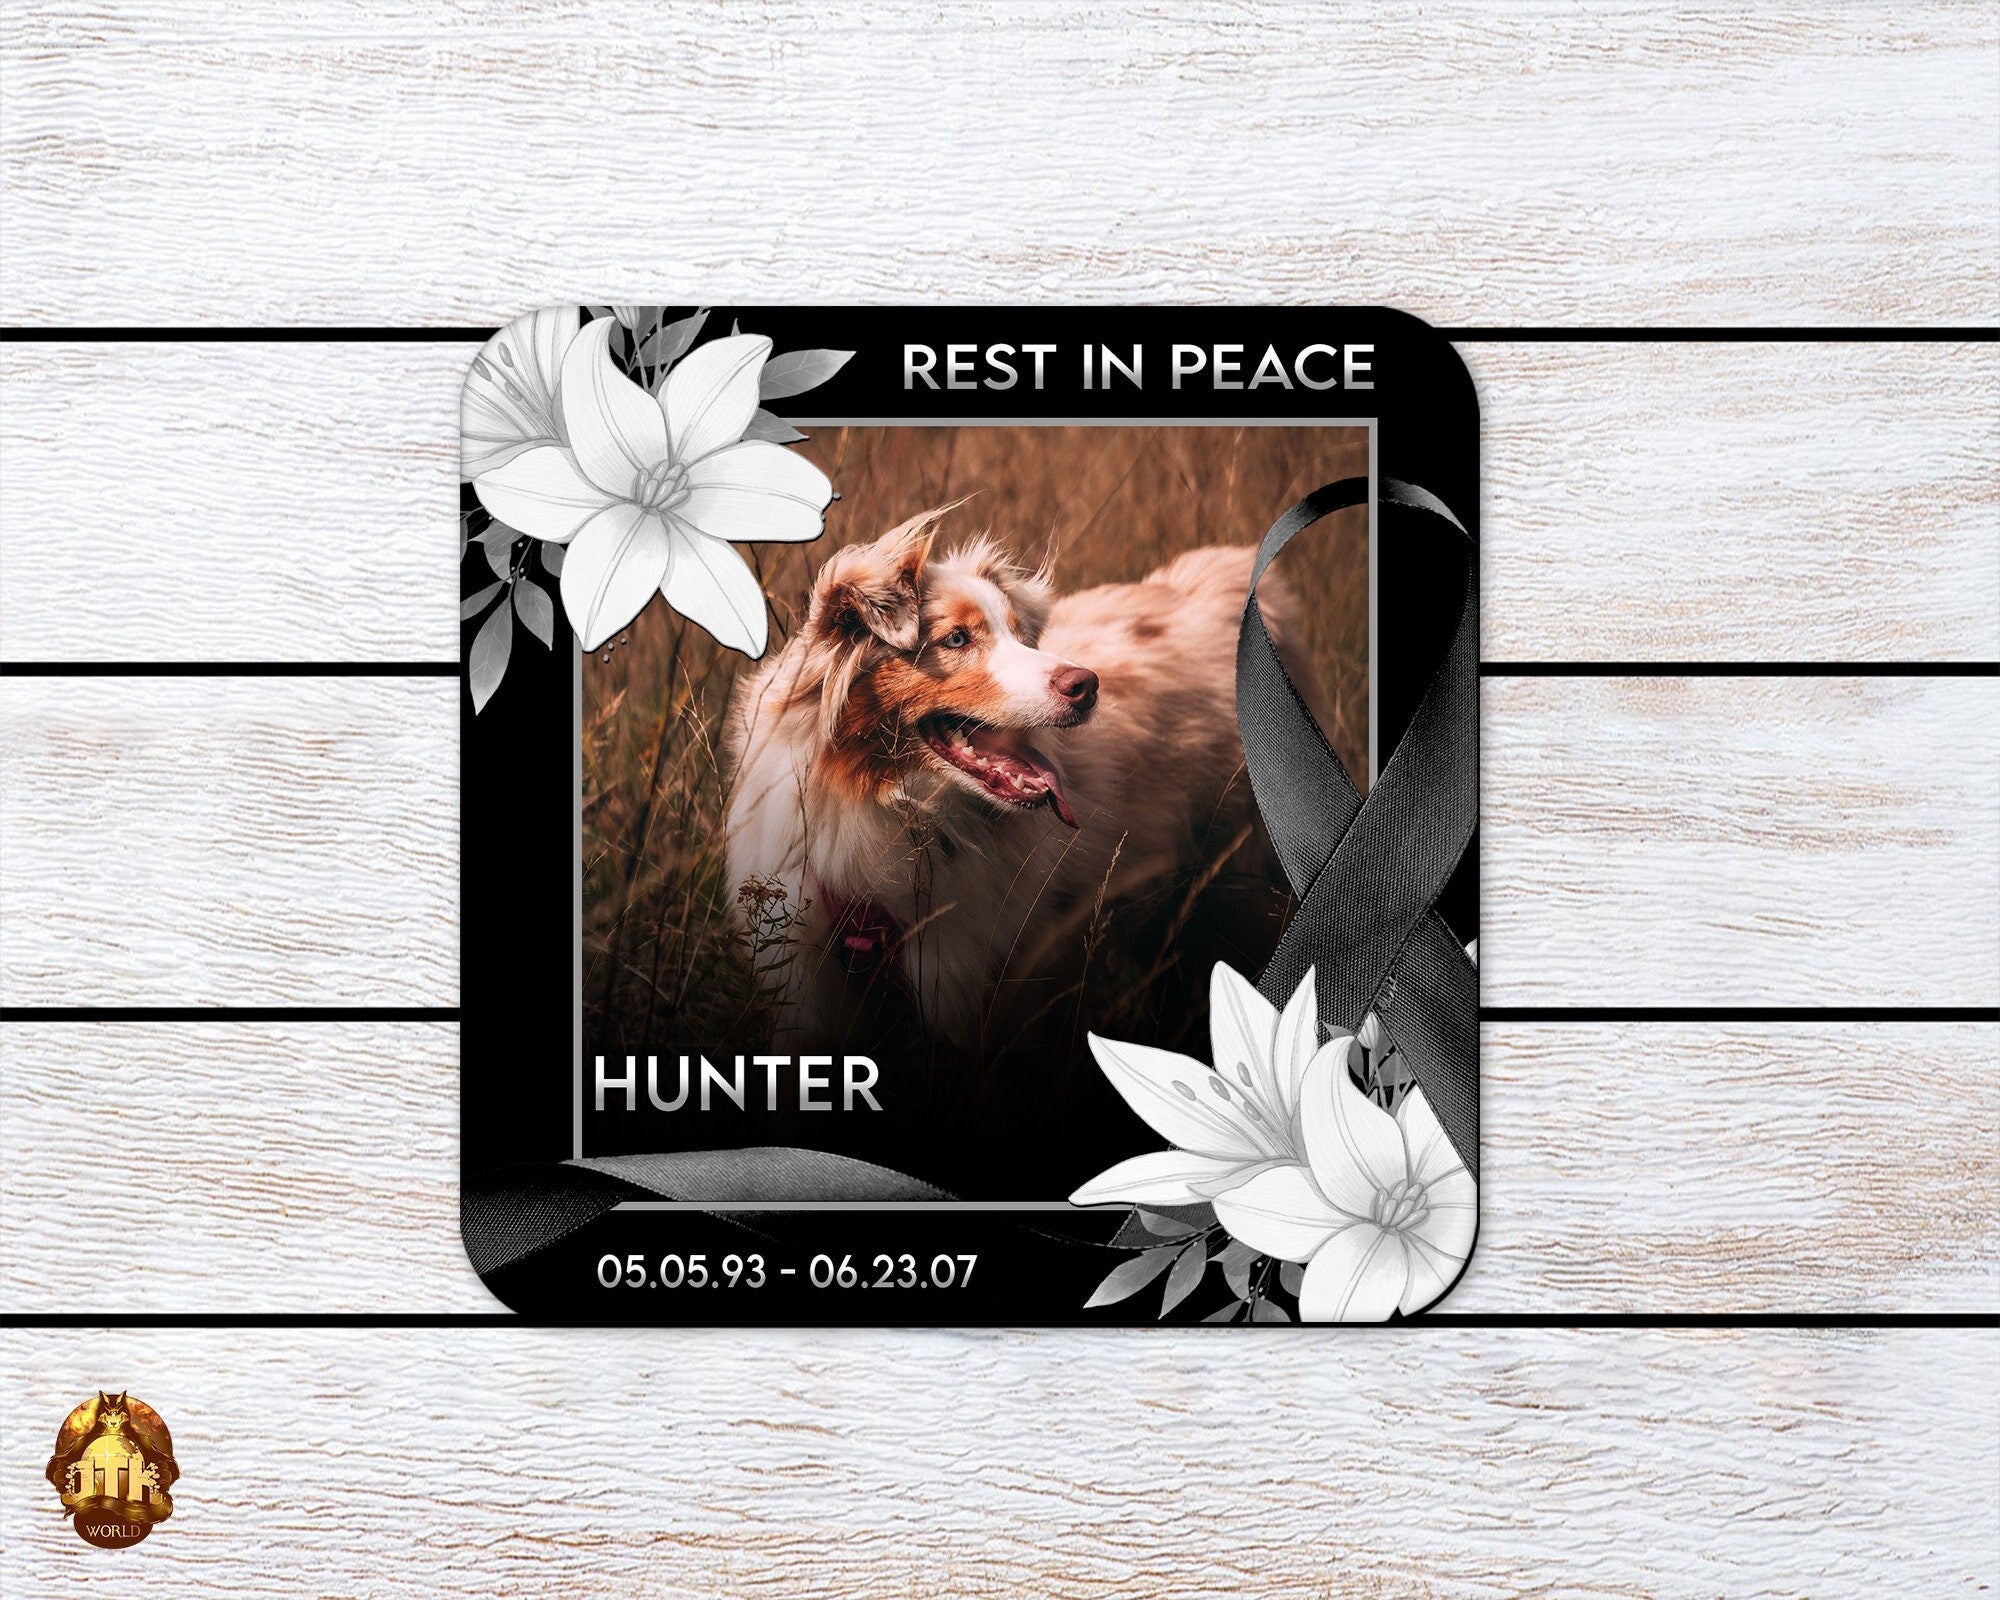 Personalized Memorial Photo Coasters - Custom Rest In Peace Coasters - Remembrance Photo Coasters - Add Your Own Photo, Name & Date